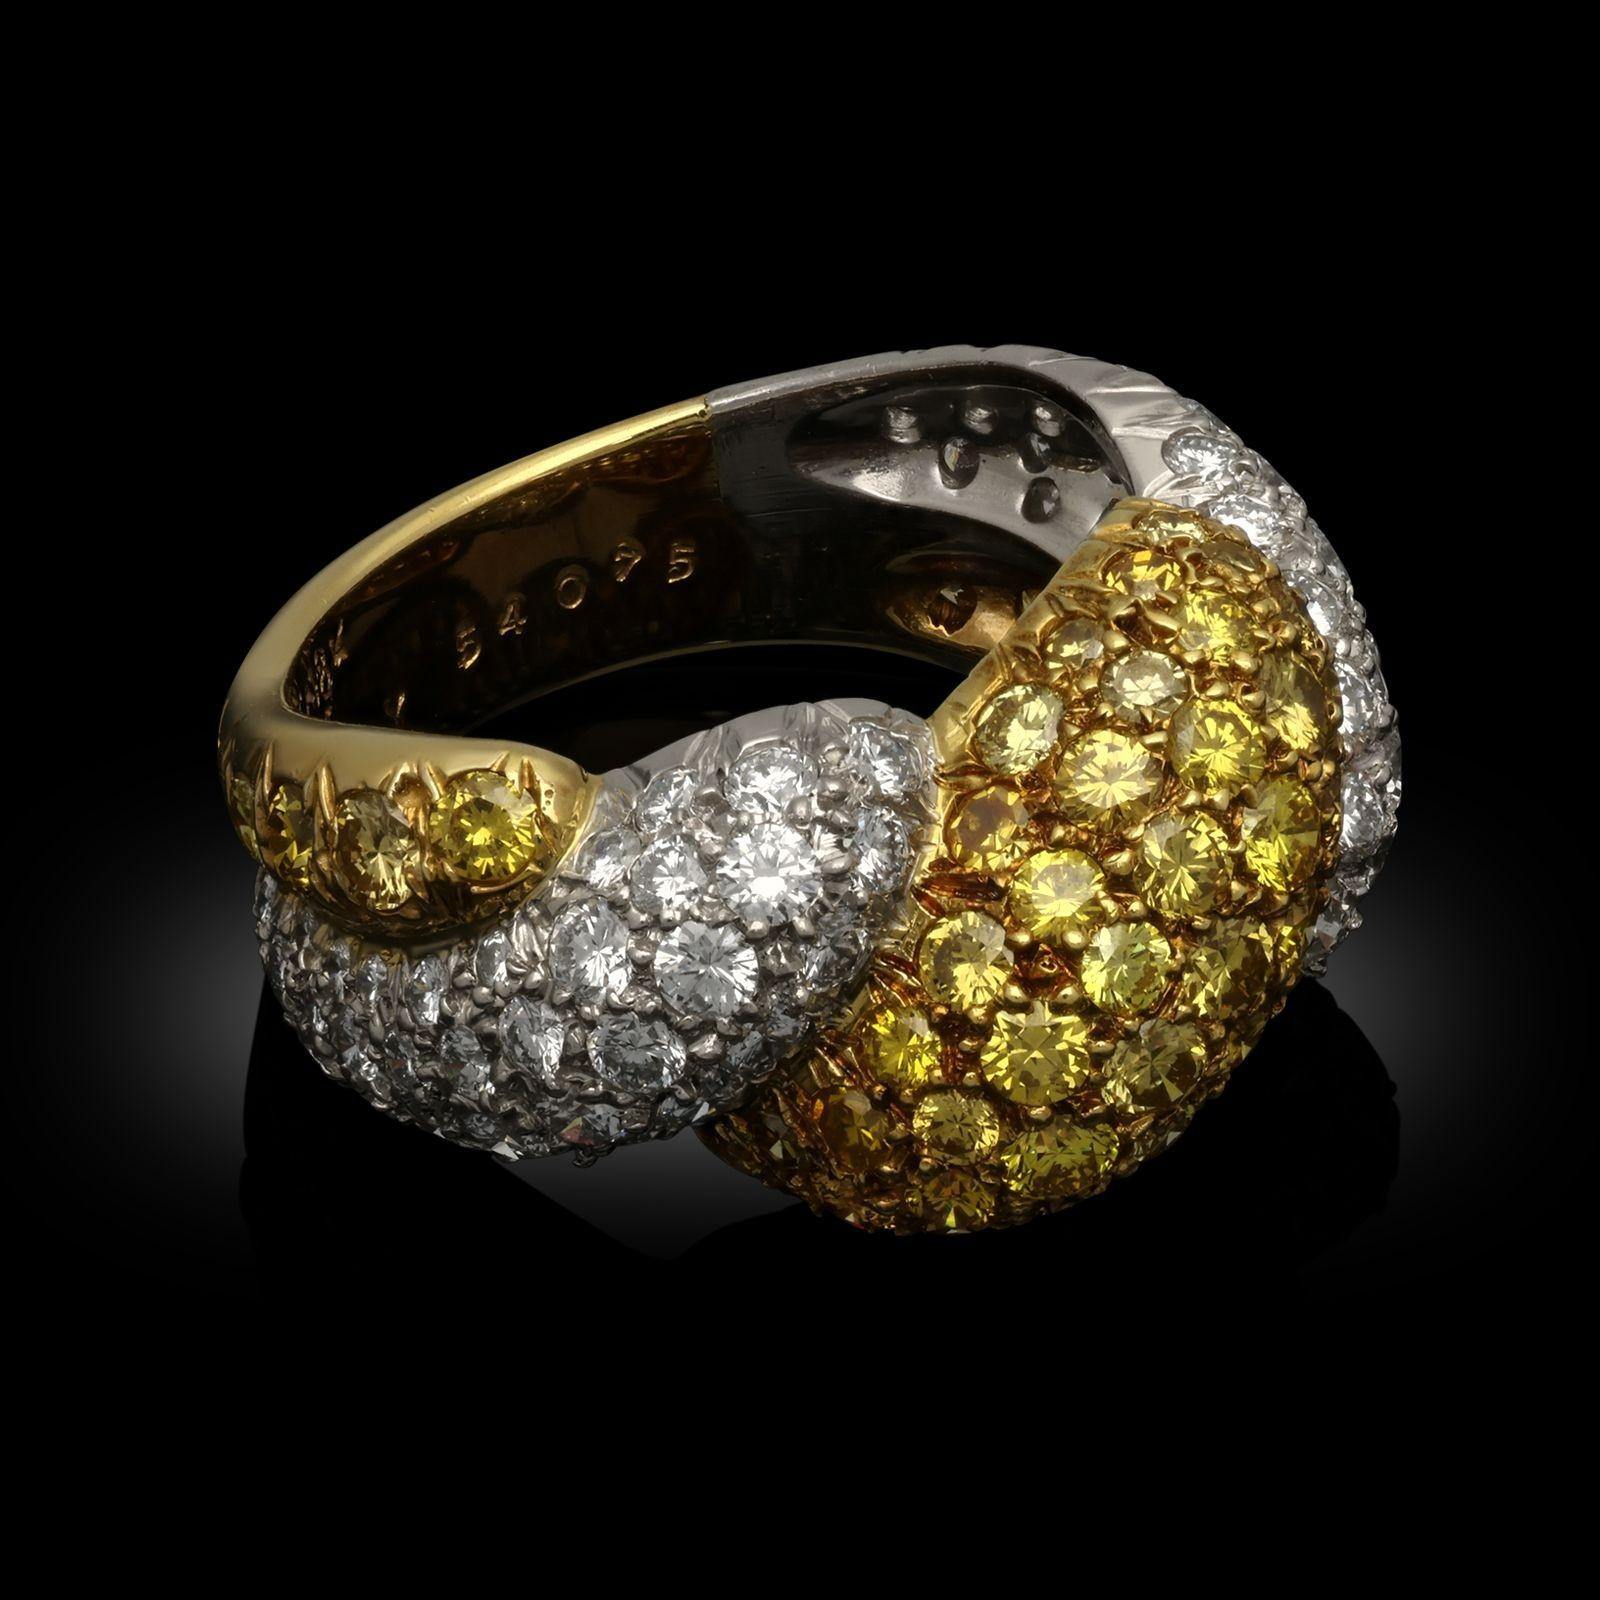 A striking yellow and white diamond bombe dress ring by Van Cleef & Arpels c.1980s, the ring with a high domed profile and shaped wrap-over twist design, formed of a band of pavé set round brilliant cut yellow diamonds set in 18ct yellow gold